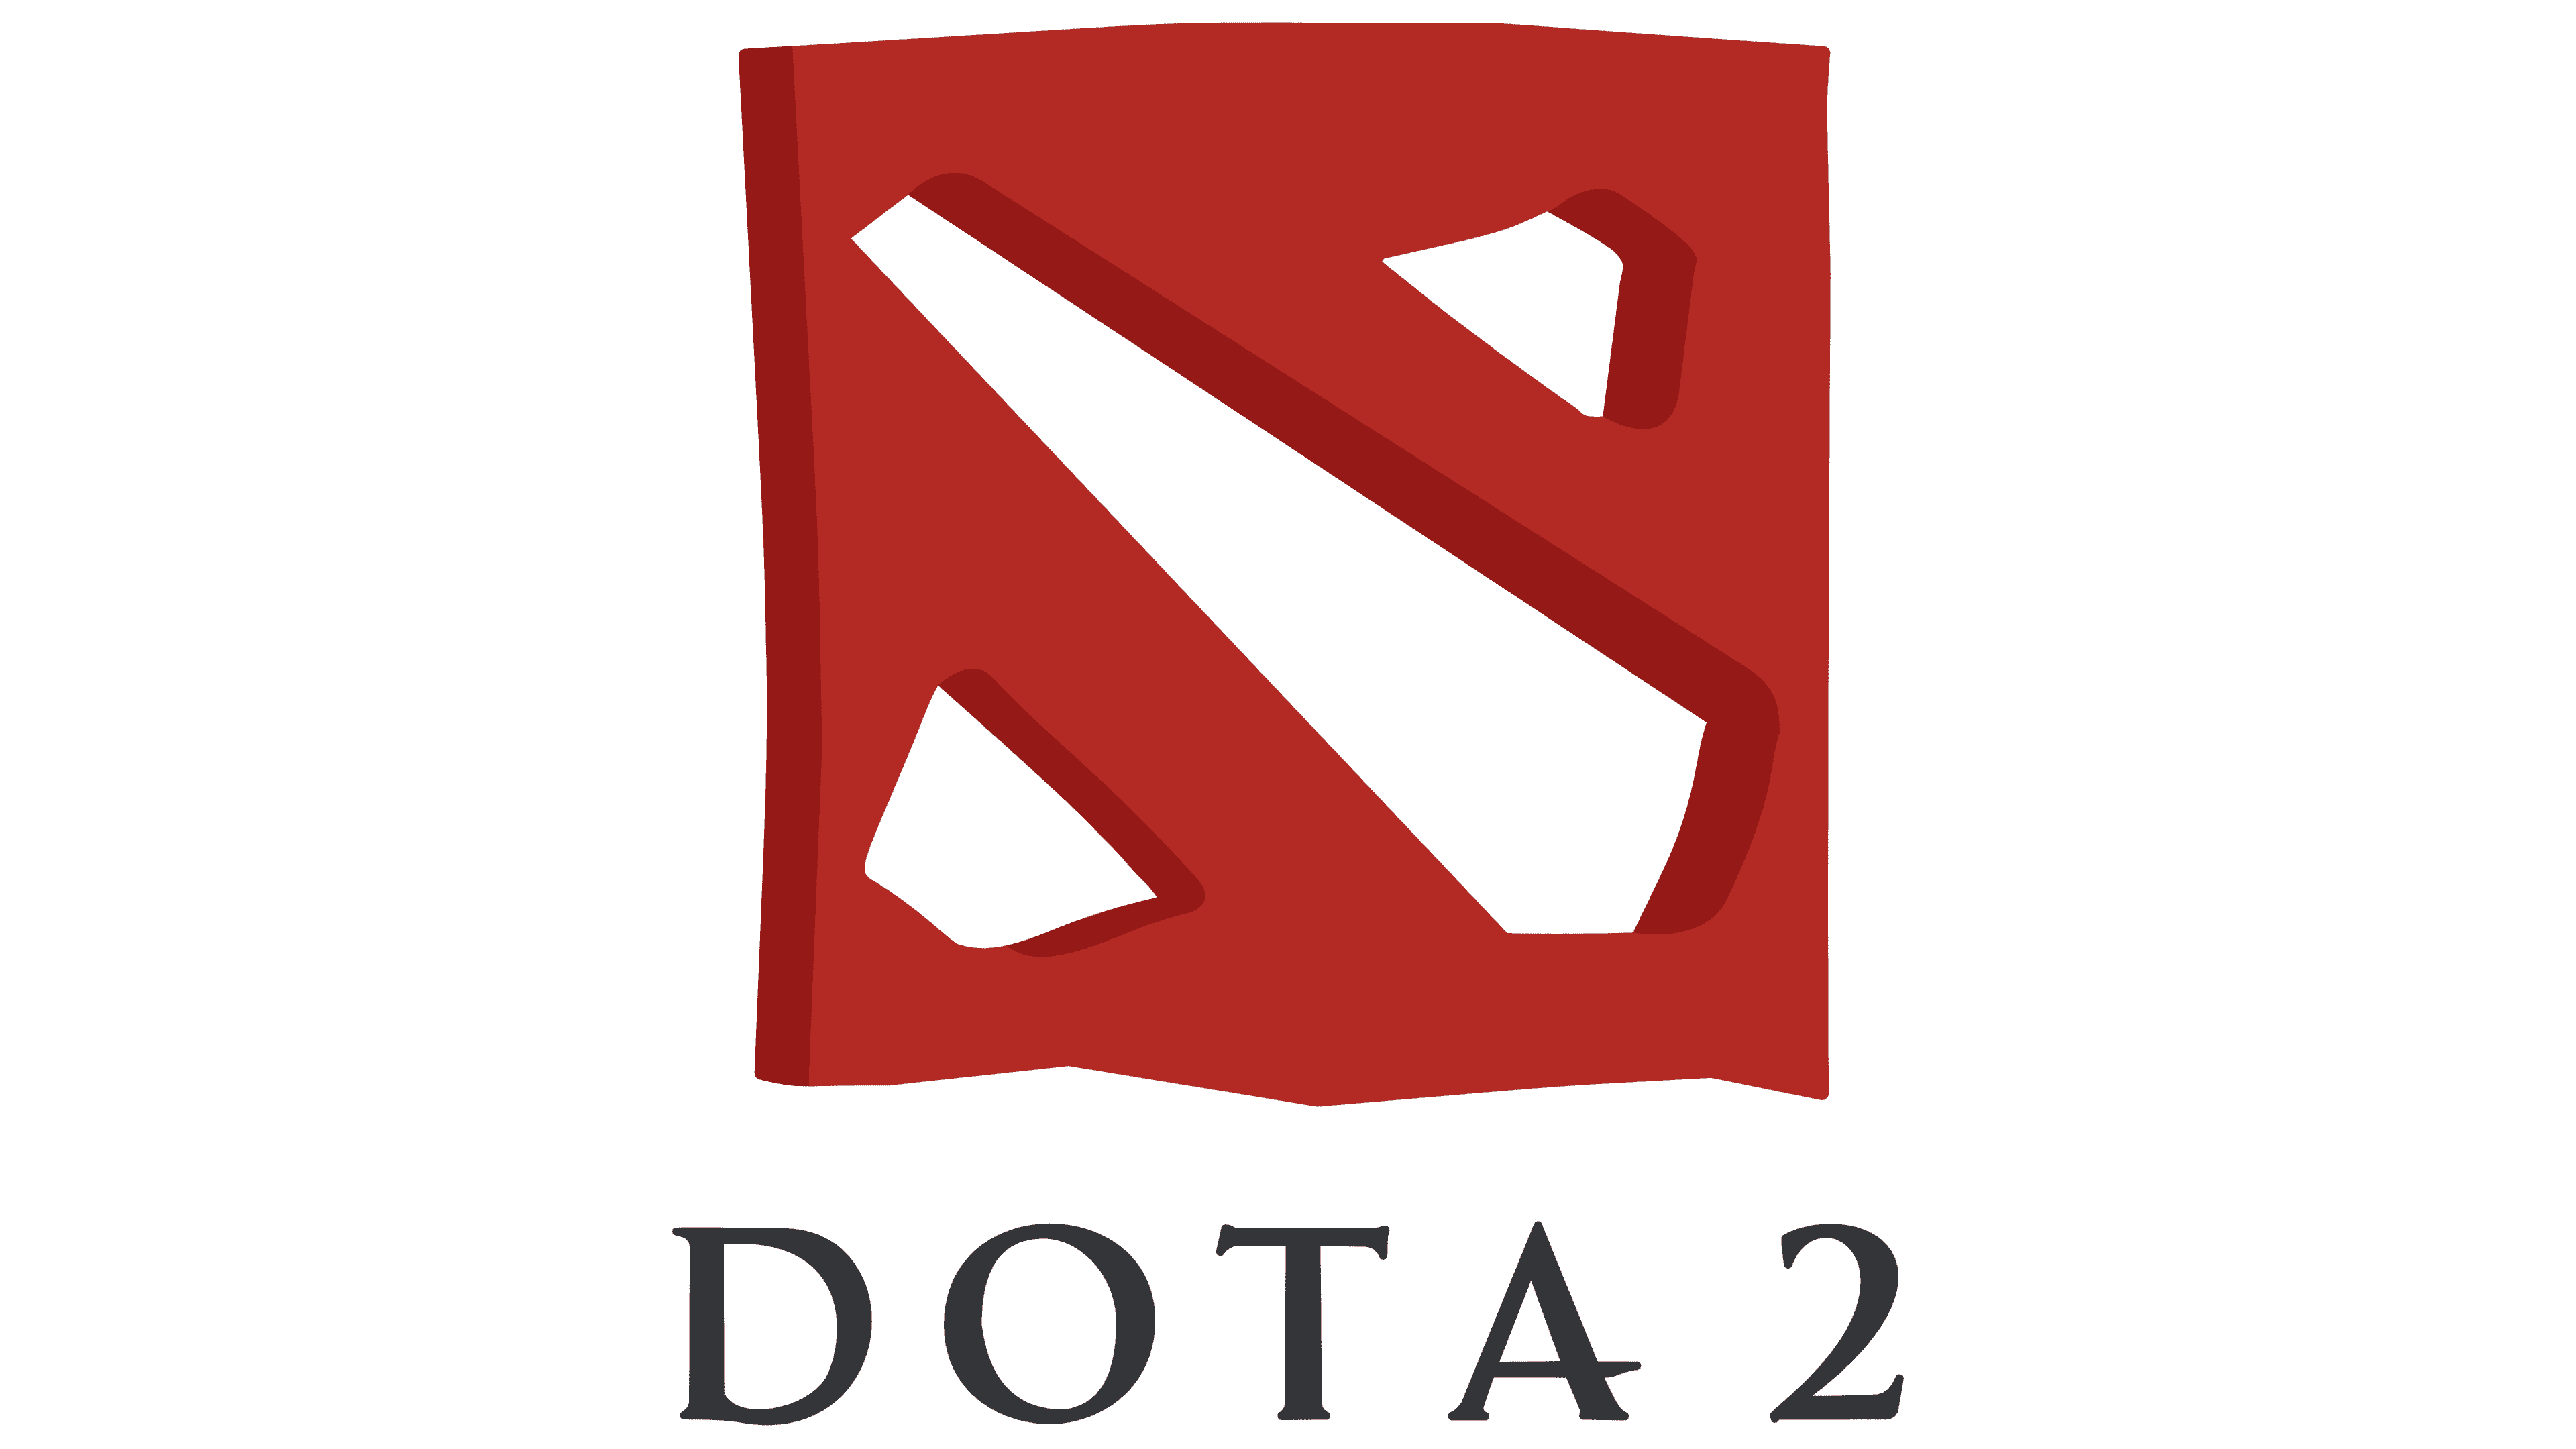 Dota 2 1080x1920 Resolution Wallpapers Iphone 7,6s,6 Plus, Pixel xl ,One  Plus 3,3t,5